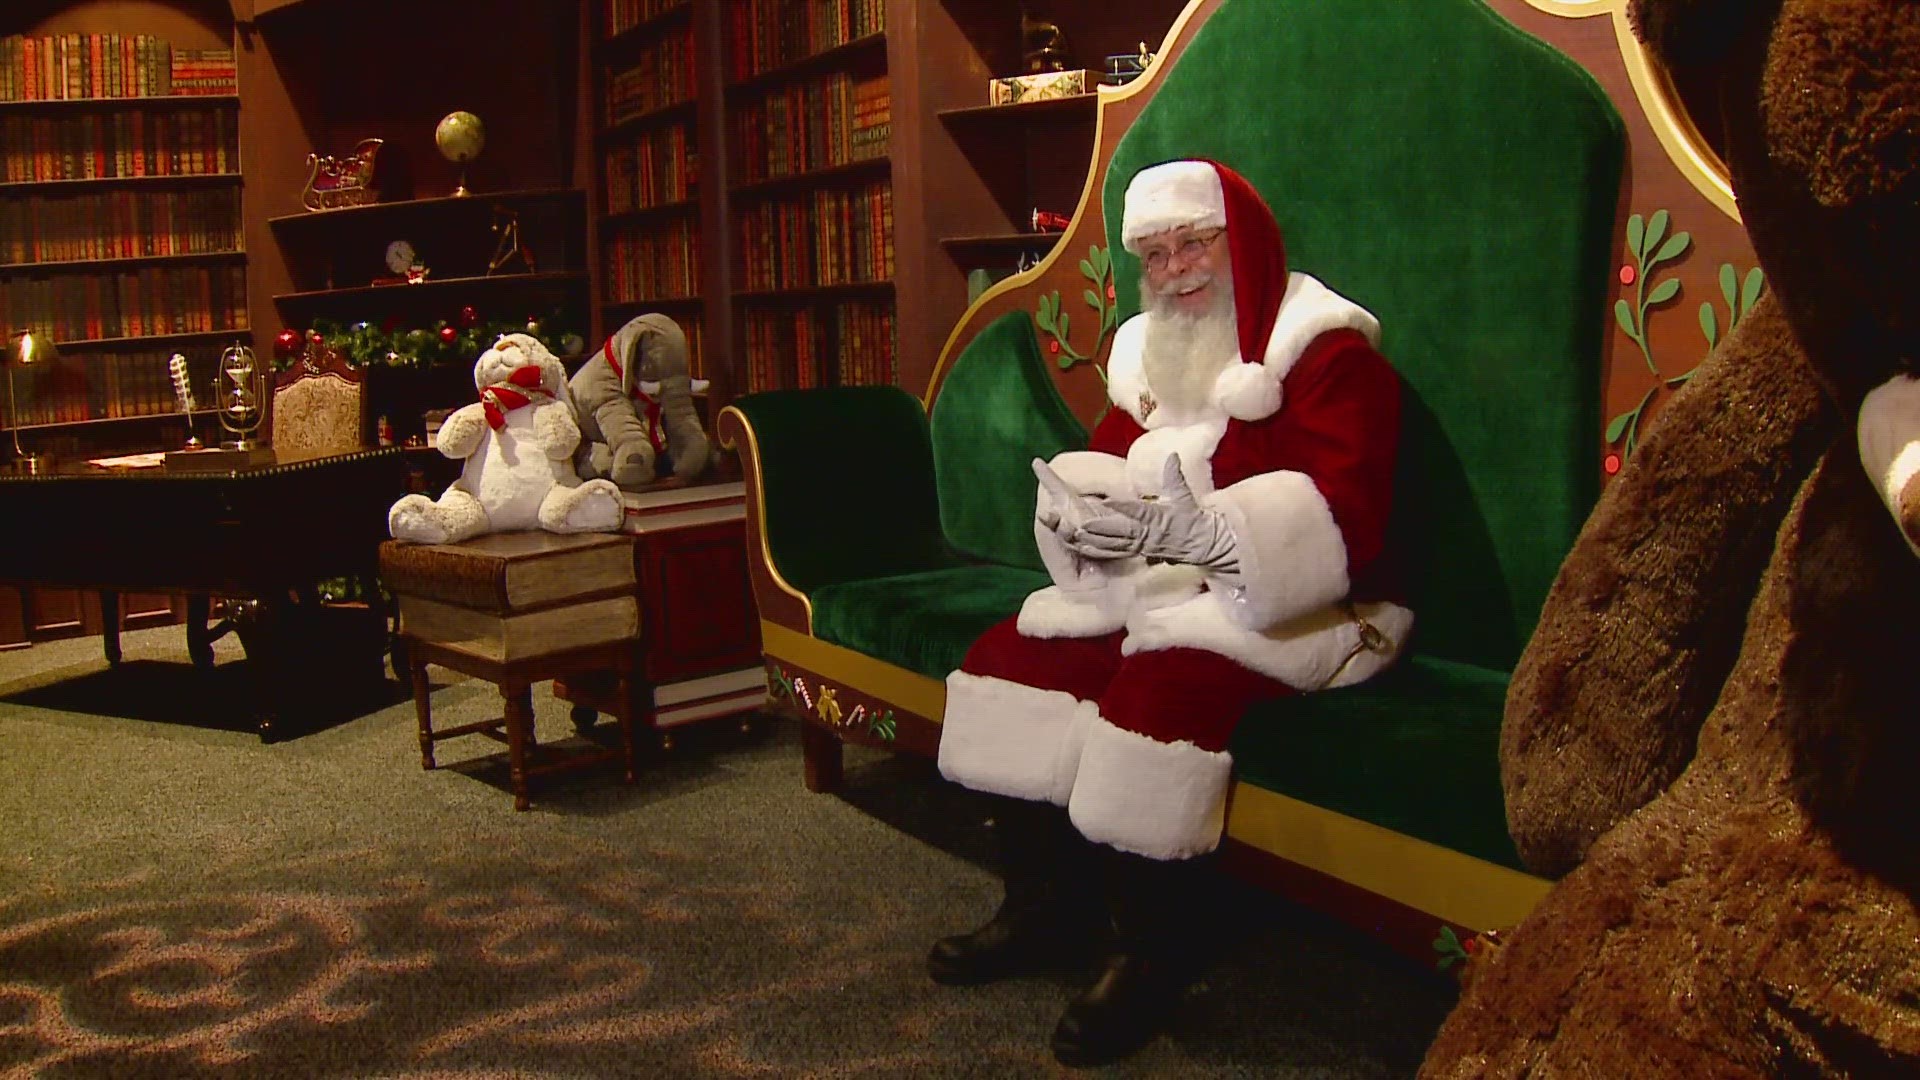 Santa travels around the country to meet with children. He says many kids are happy to see he understands them, and can communicate with them easily.